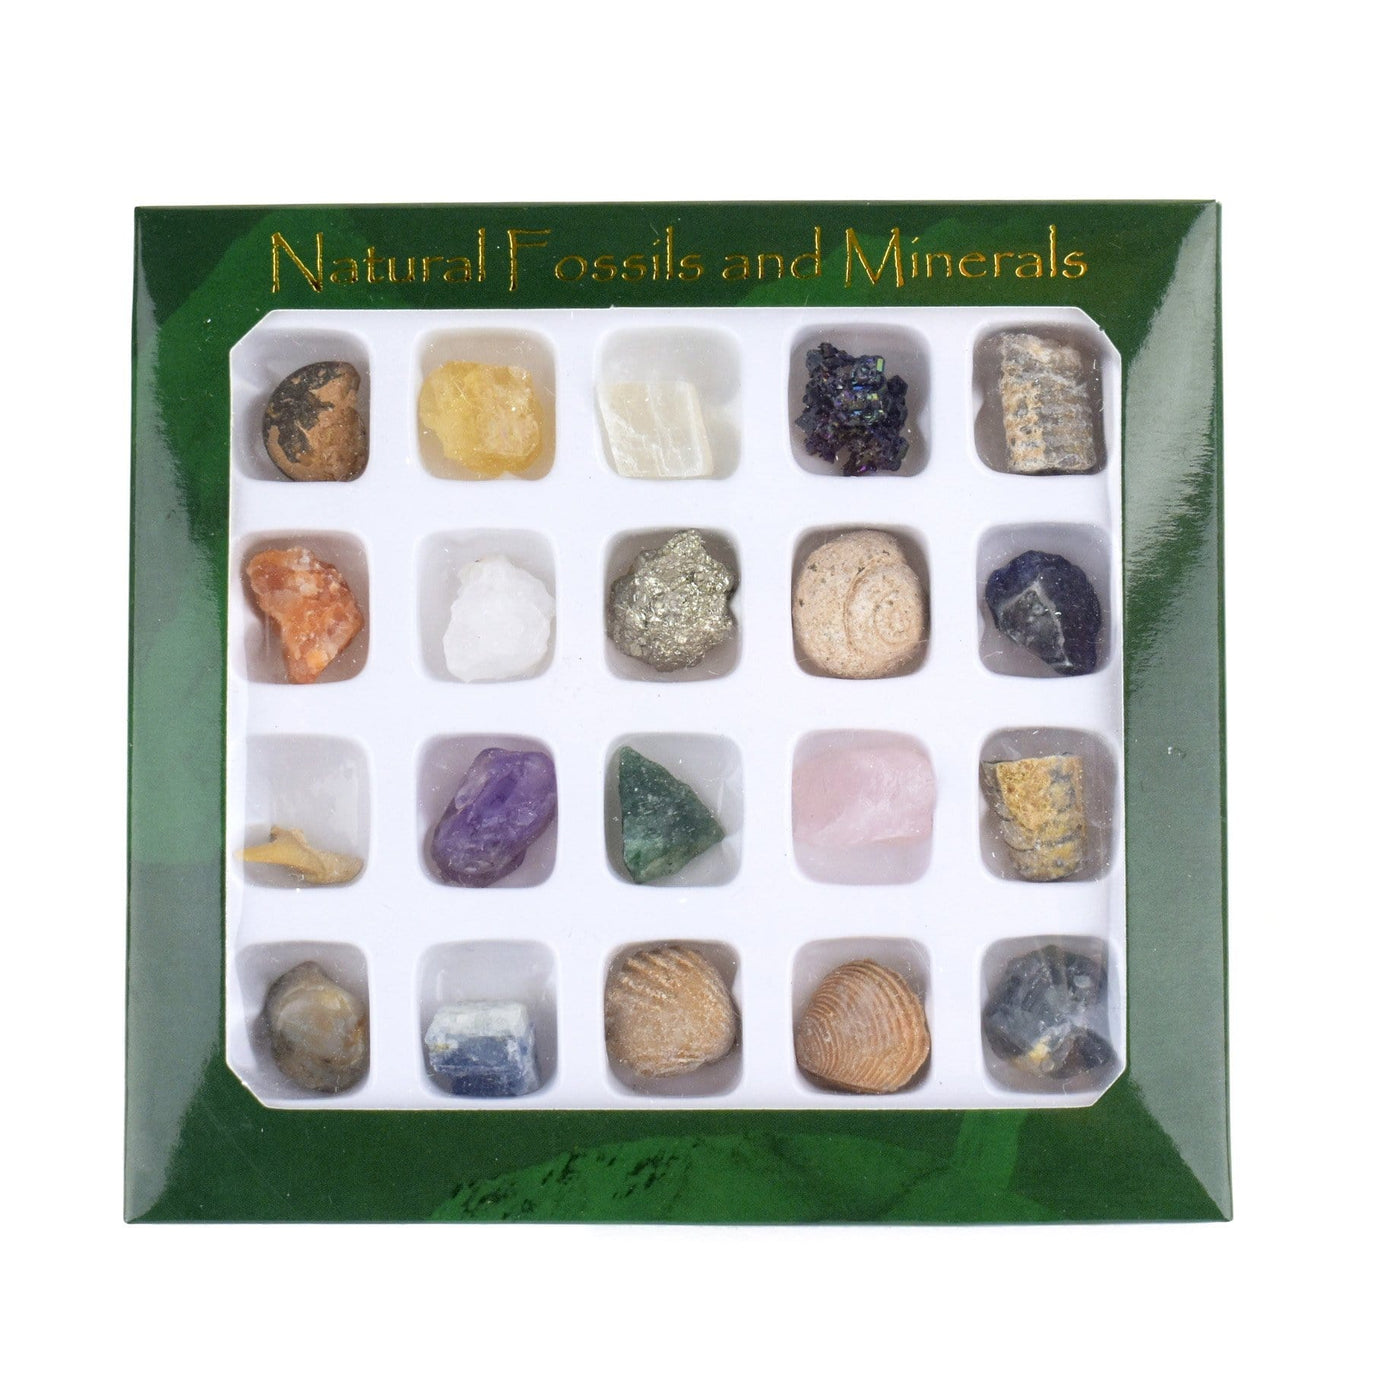  Mini Fossil and Mineral Natural Stone Collection set displayed in green box with clear cover showing 20 items